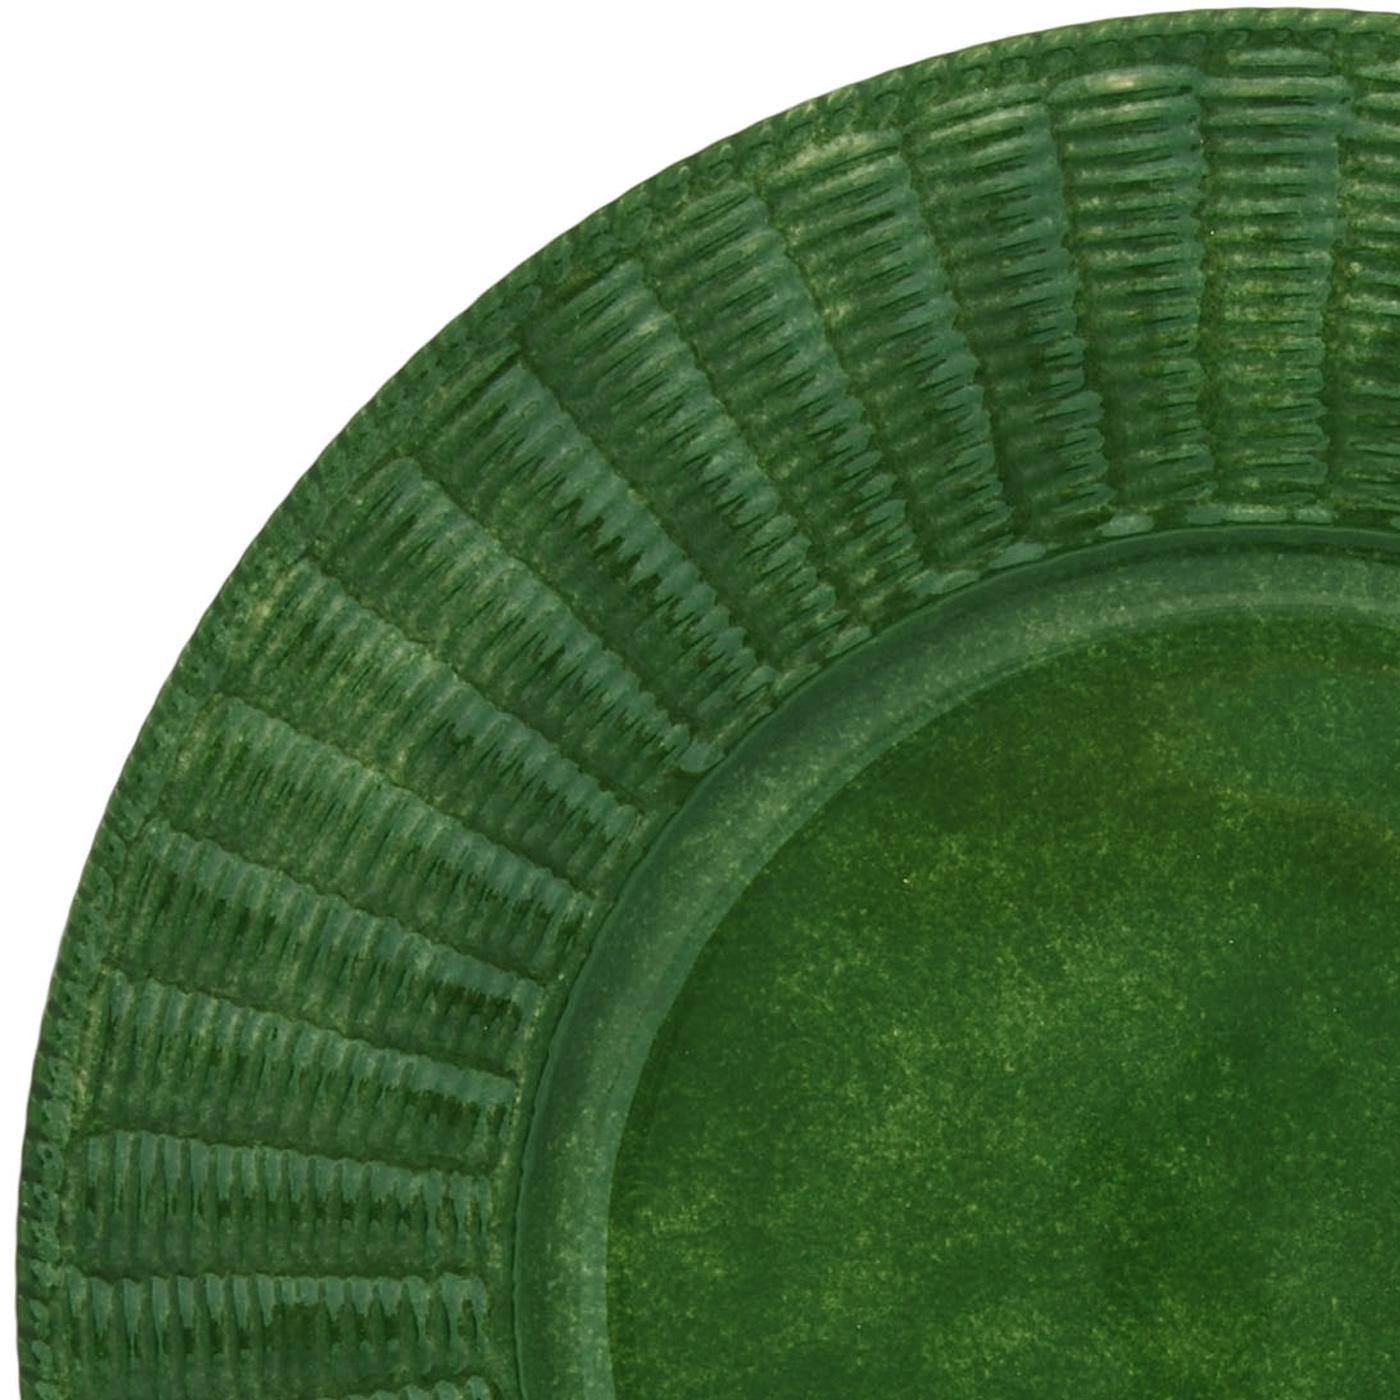 This is a set of twelve large plates conceived as placeholders, to be left as base as courses change, finished in a rich shade of green with a sponge effect. The pieces are characterized by Este Ceramiche's signature wicker border, flawlessly